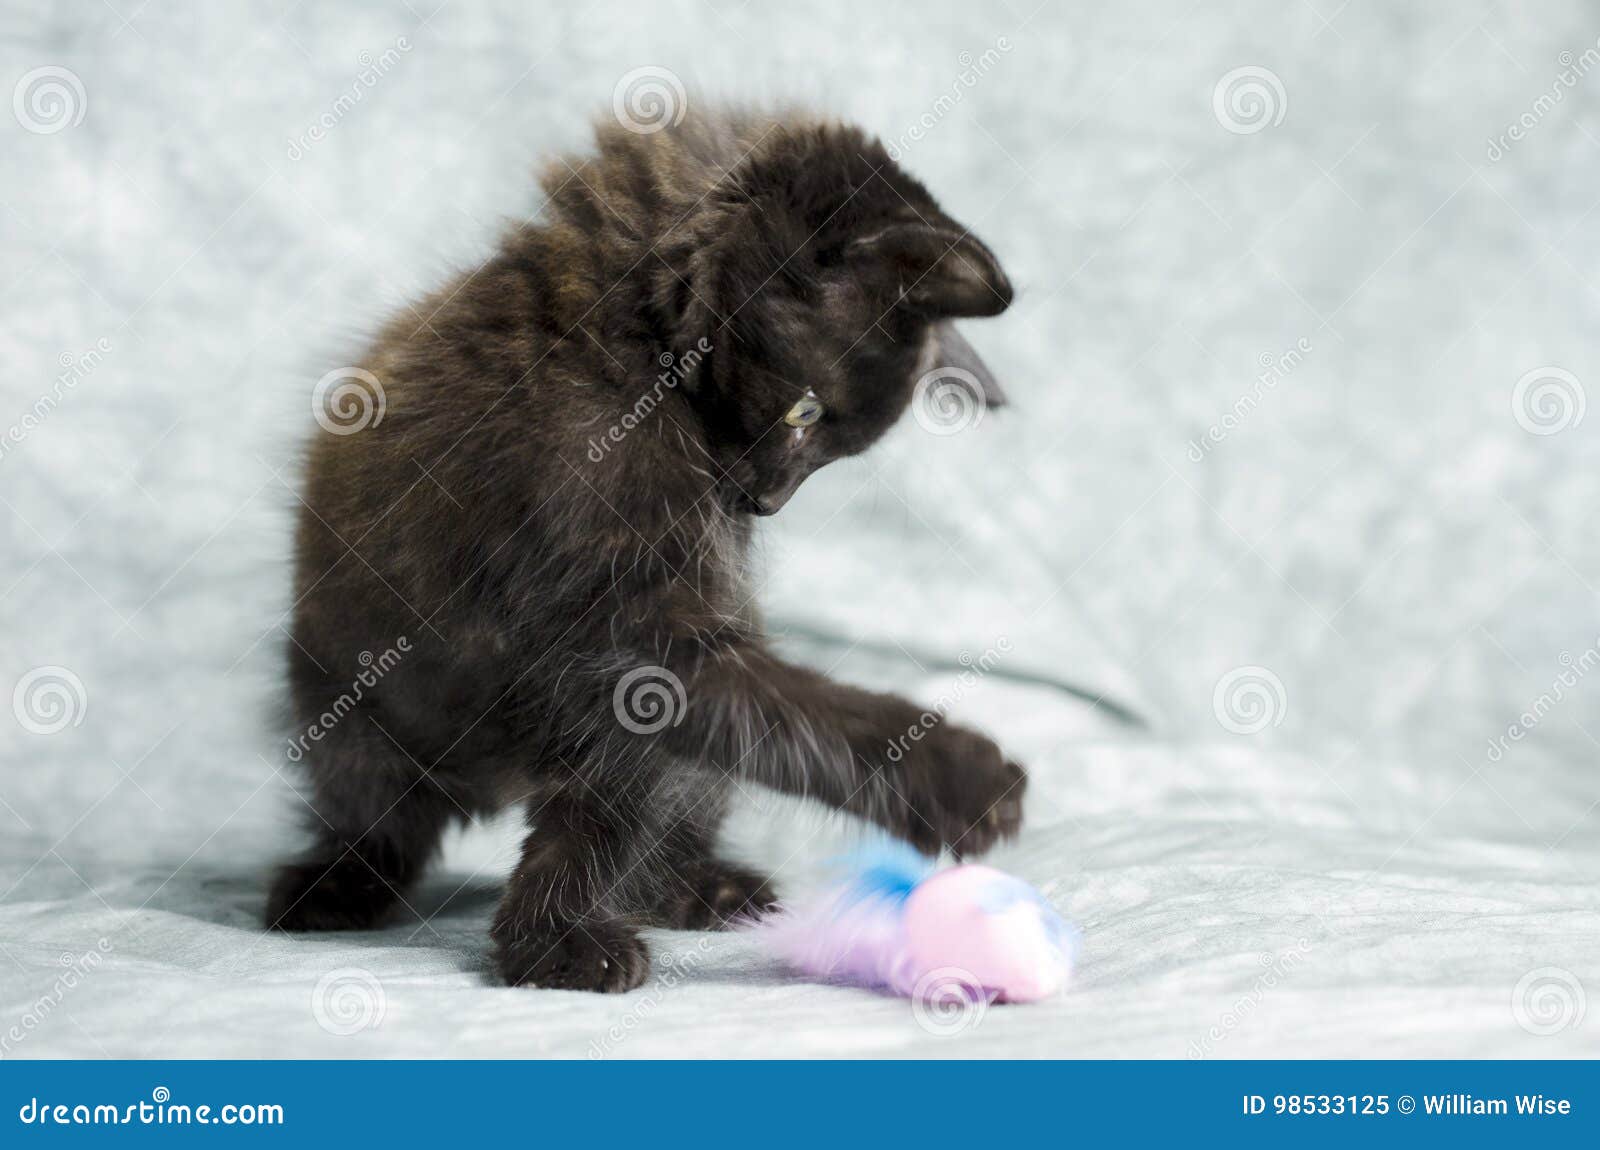 black long hair kitten playing with pink mouse feather